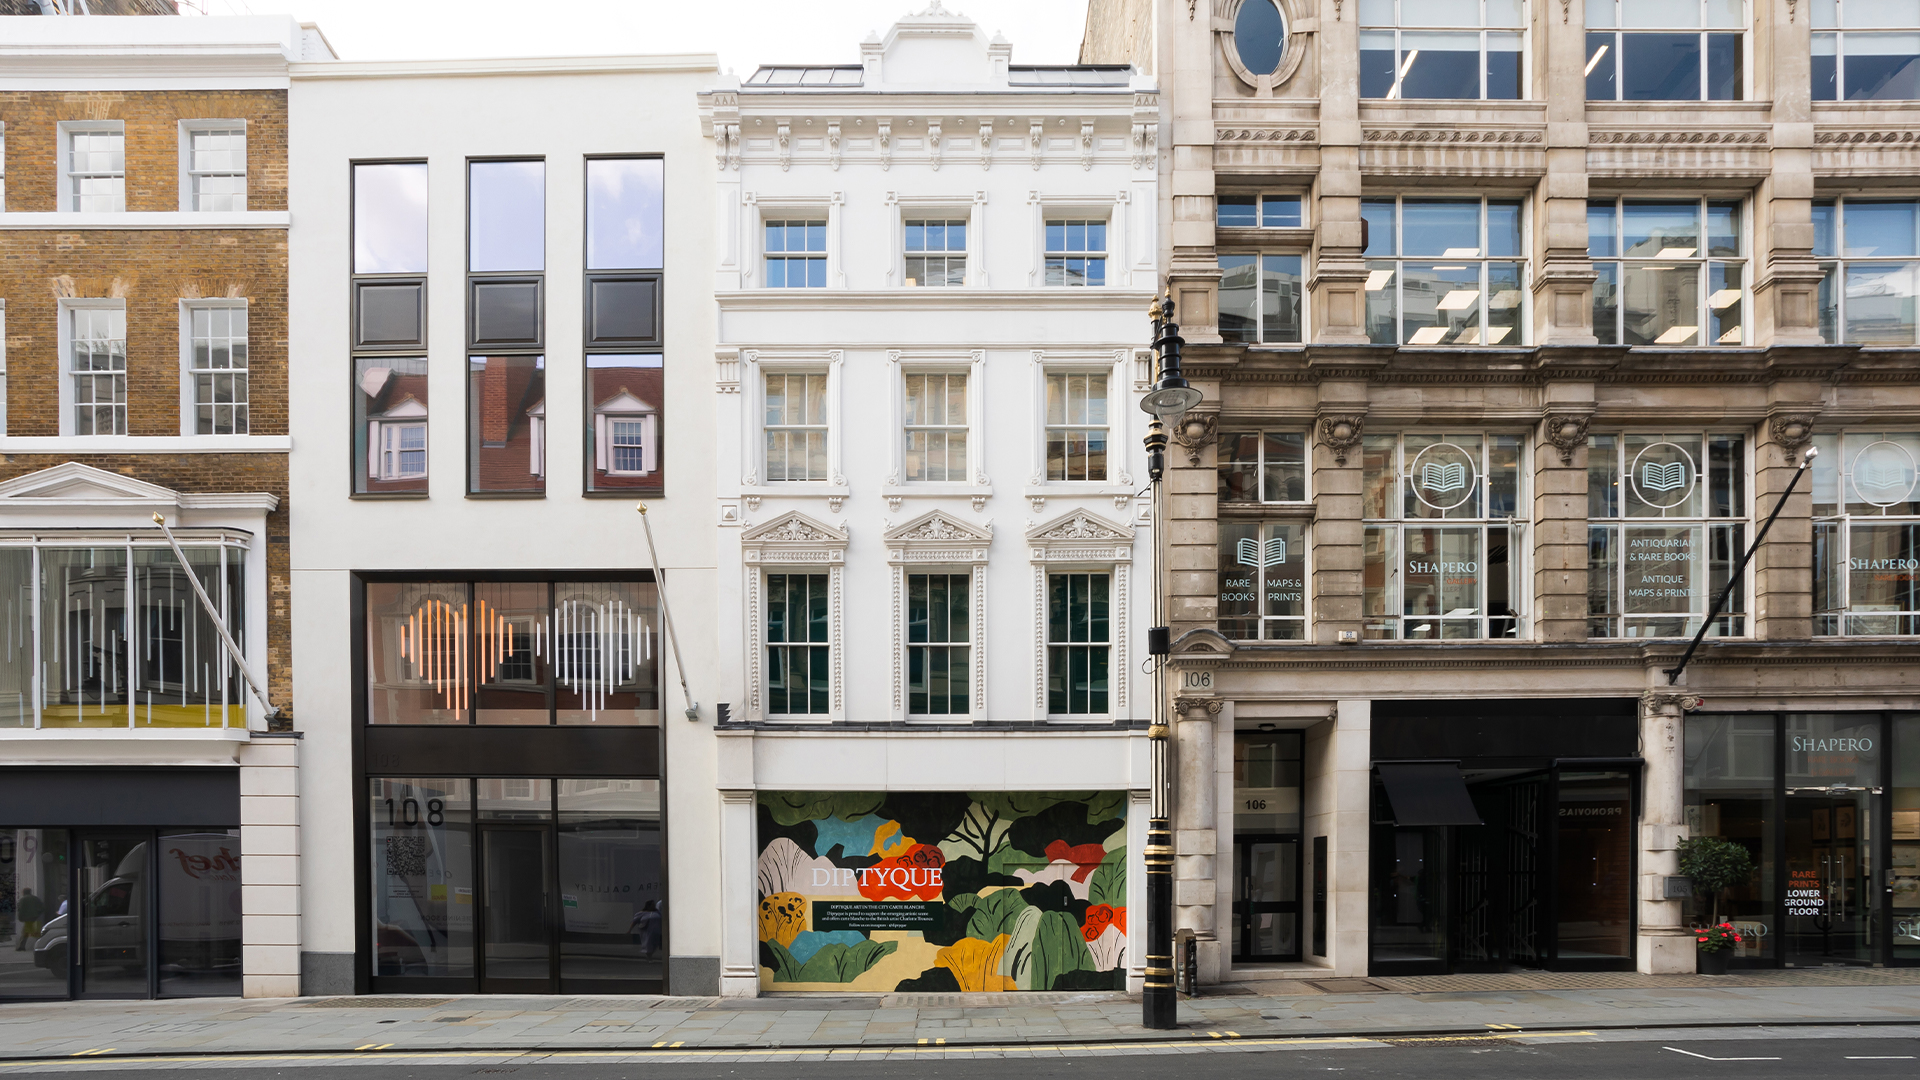 Diptyque is opening a brand-new London flagship store next month